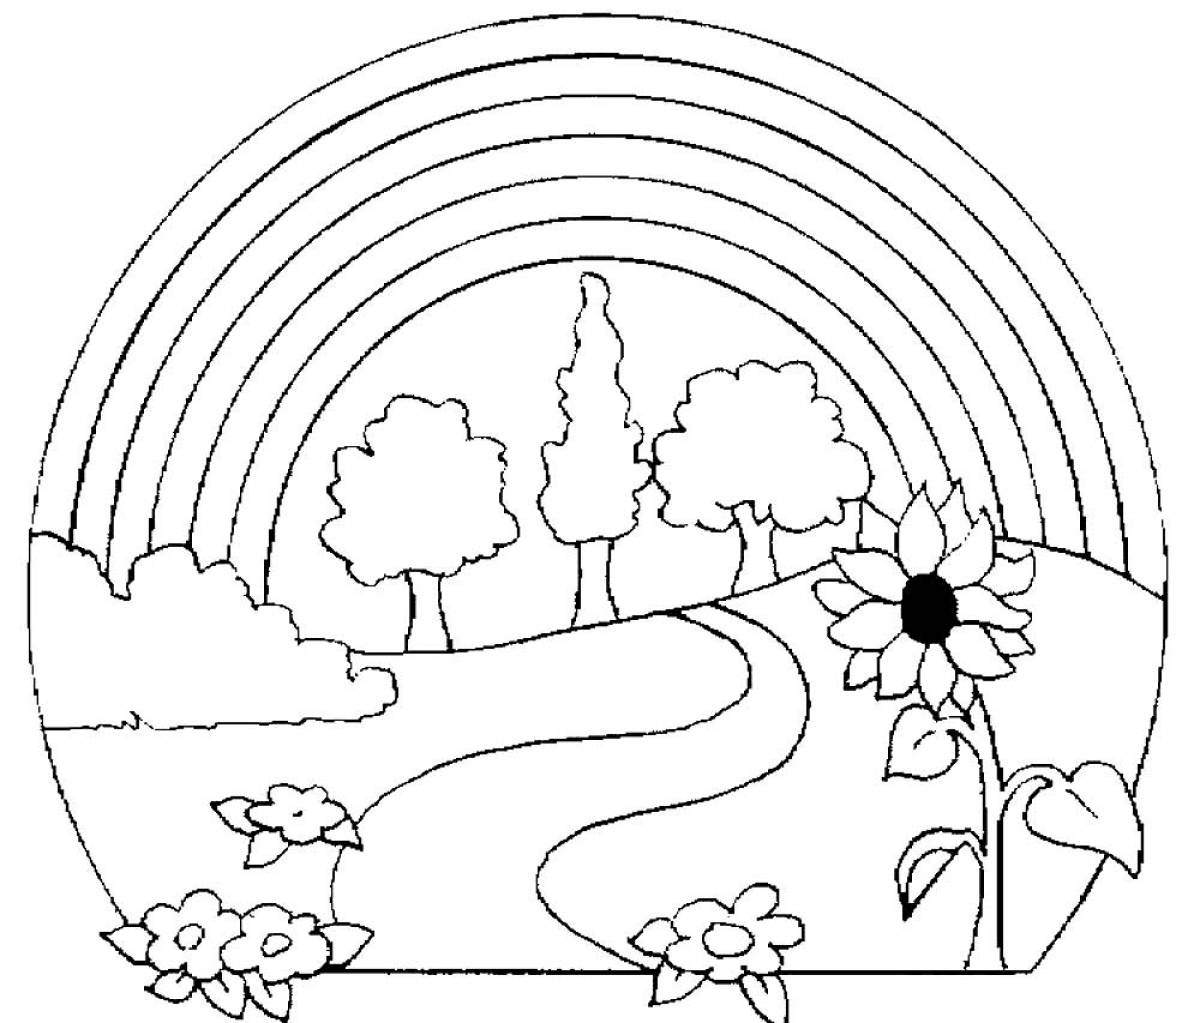 Coloring page summer landscape with a rainbow